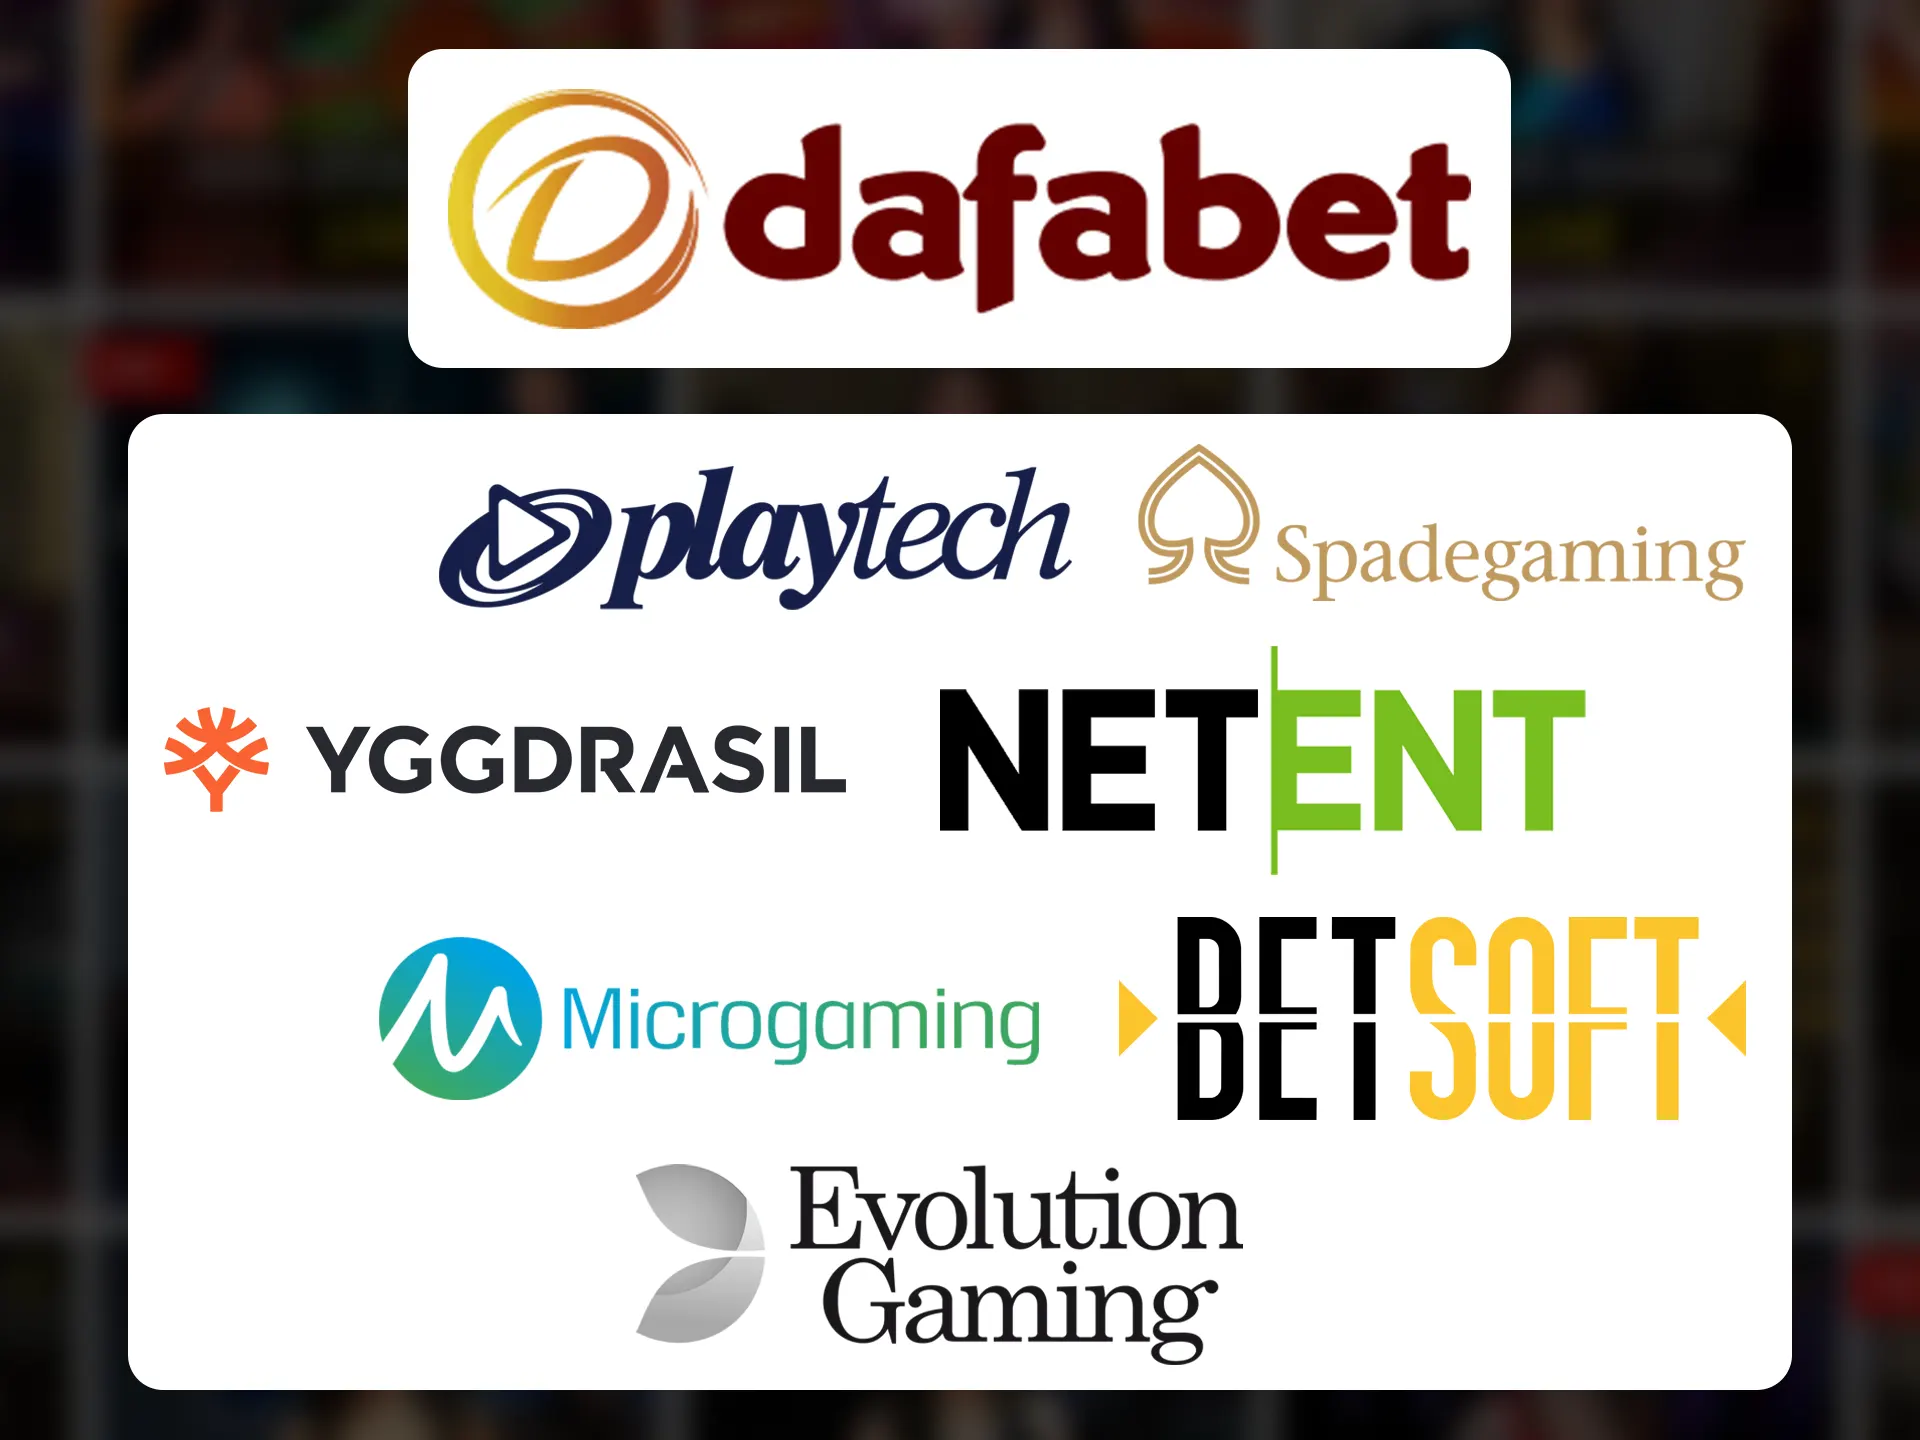 Dafabet betting company has support of different casino games providers.